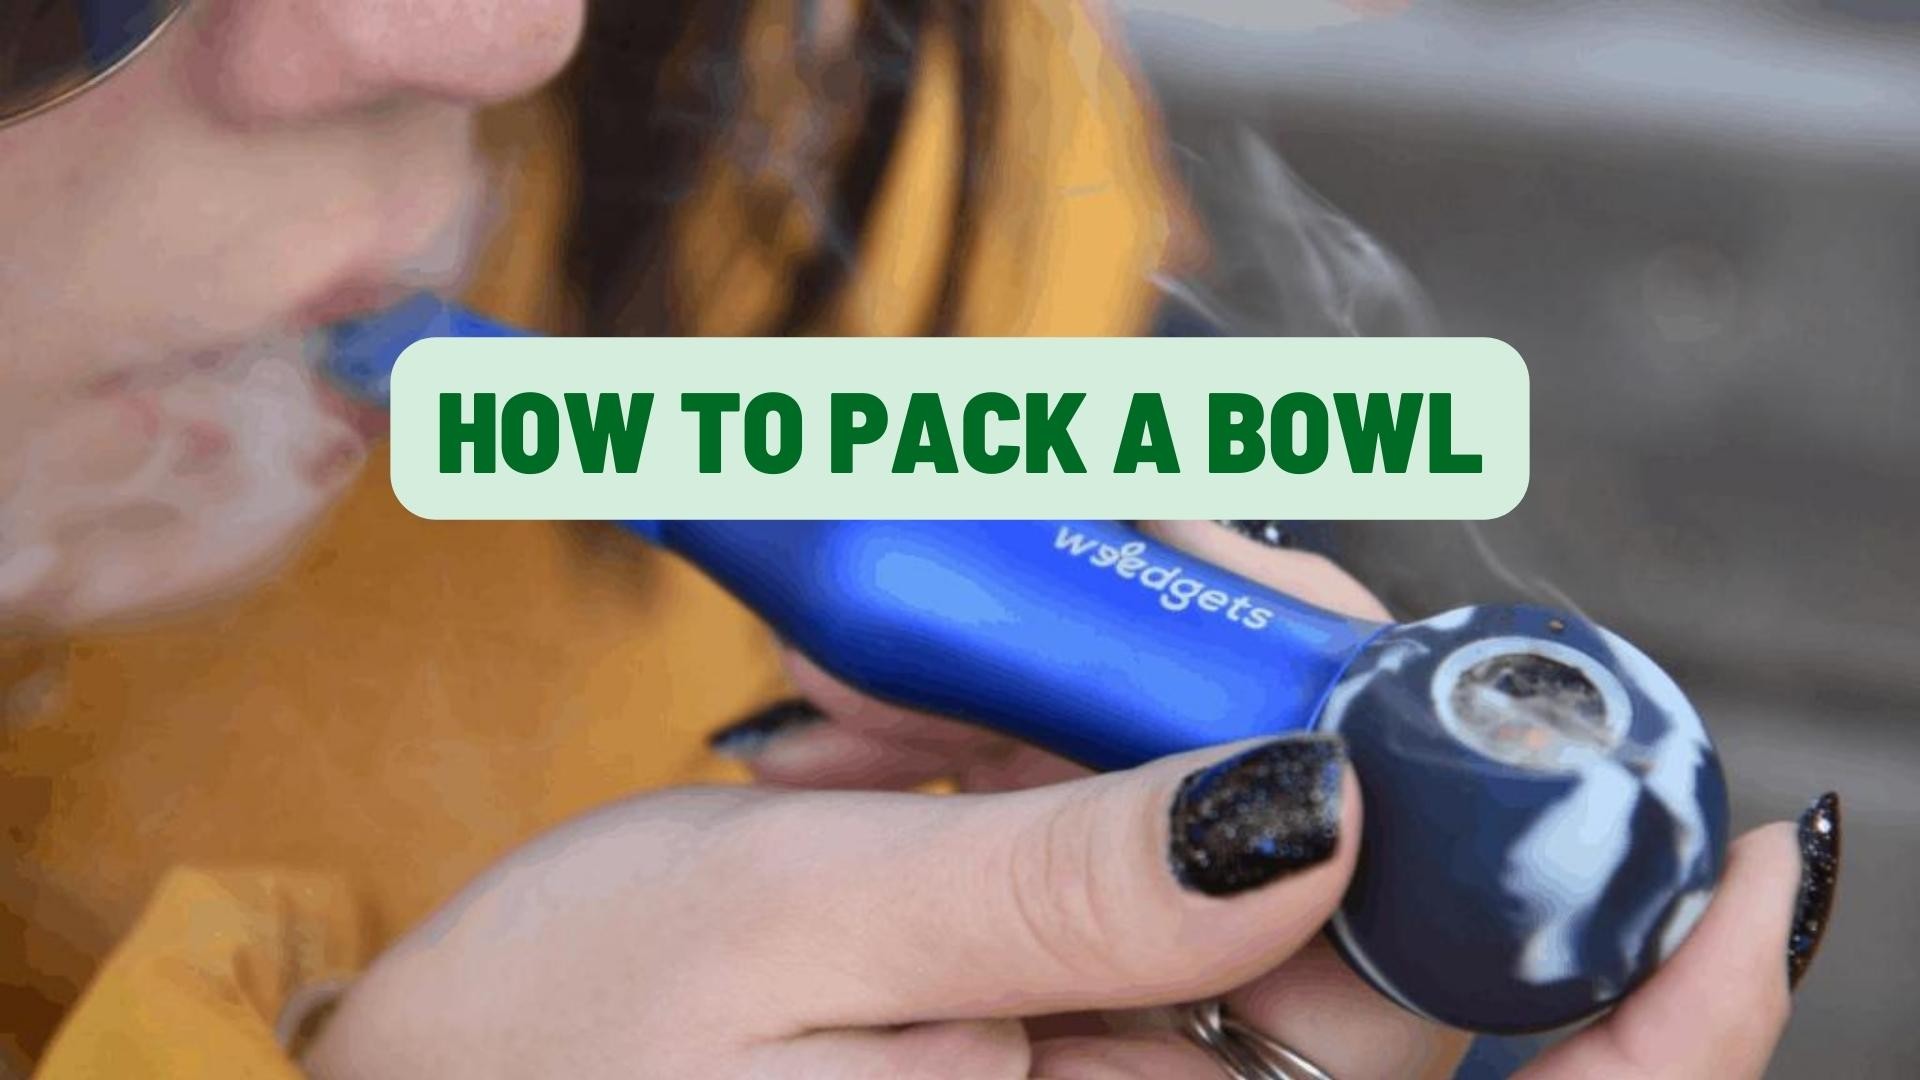 How to Pack a Bowl